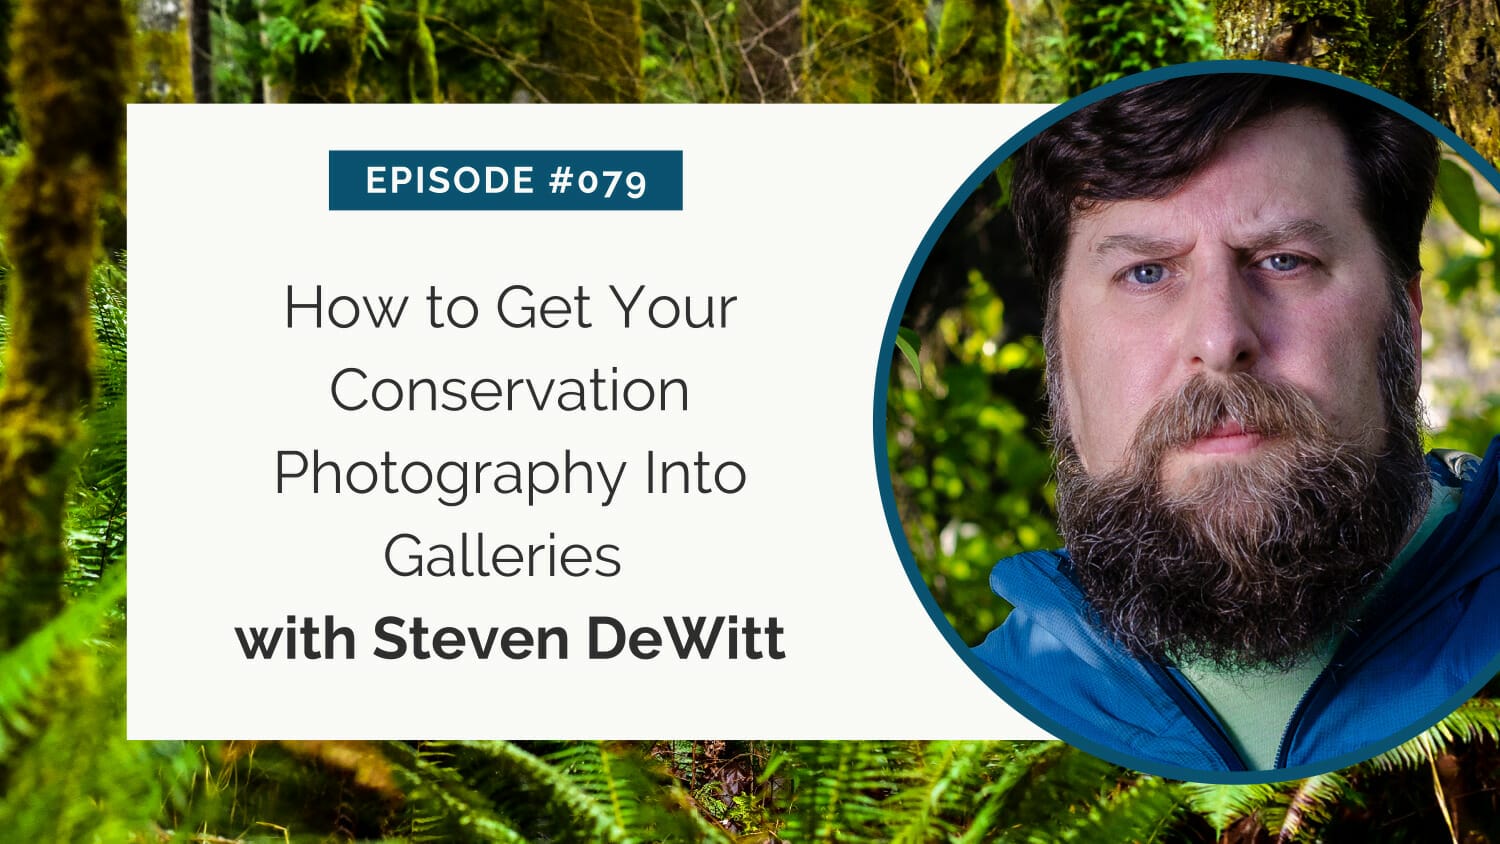 Podcast episode graphic featuring a guest named steven dewitt discussing the topic of getting conservation photography into galleries, set against a backdrop of lush greenery.